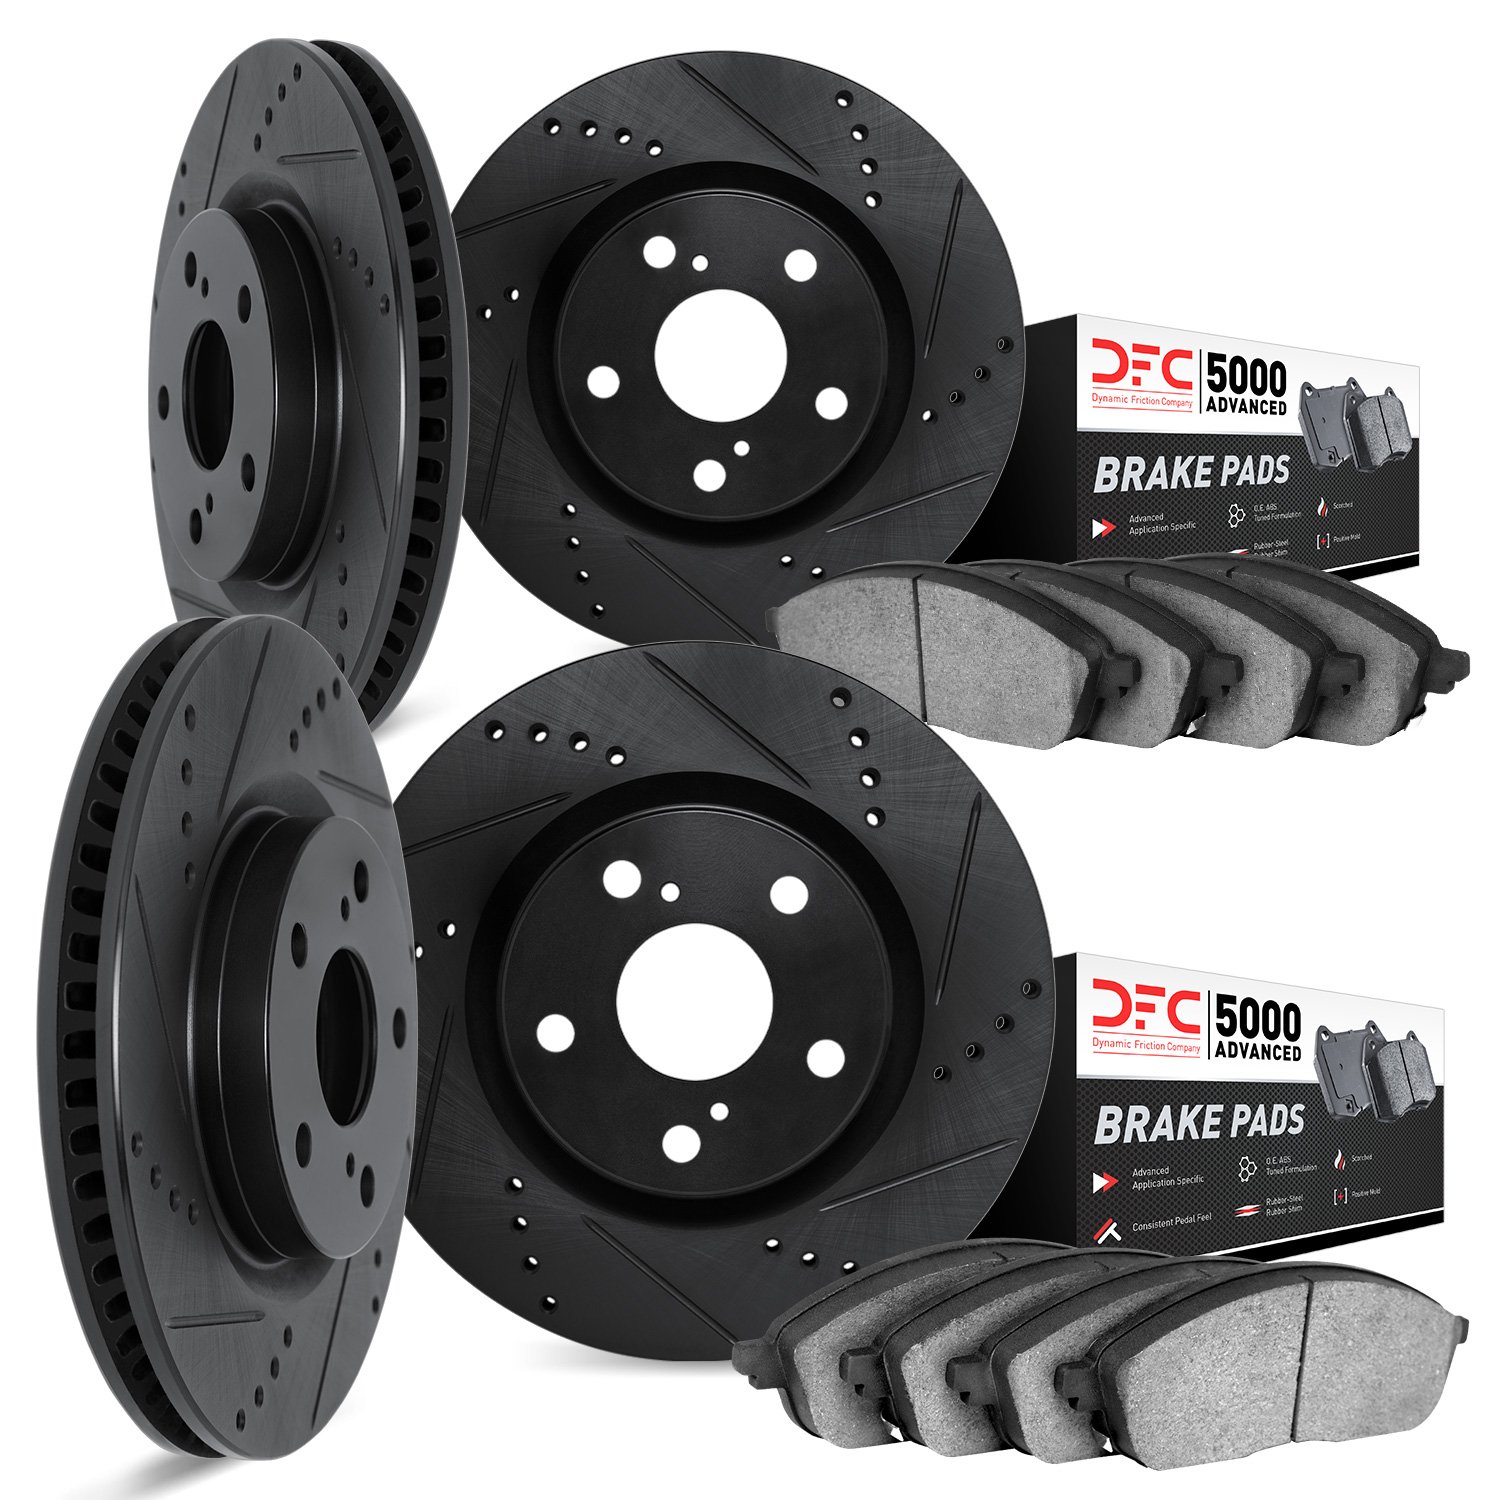 8504-31006 Drilled/Slotted Brake Rotors w/5000 Advanced Brake Pads Kit [Black], 1995-2001 BMW, Position: Front and Rear